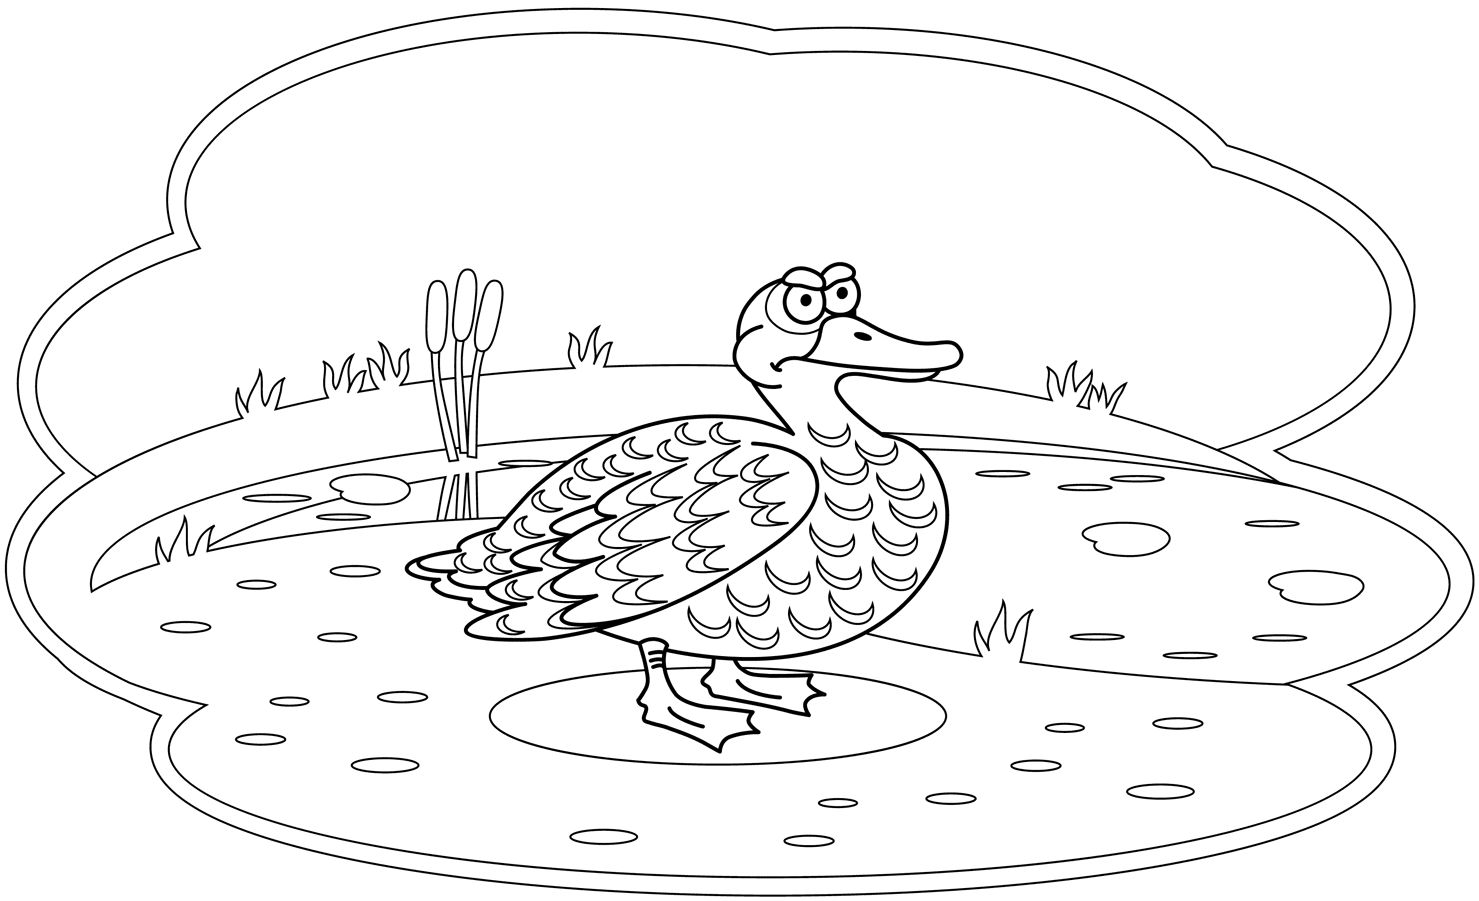 Angry duck in the swamp Coloring Page